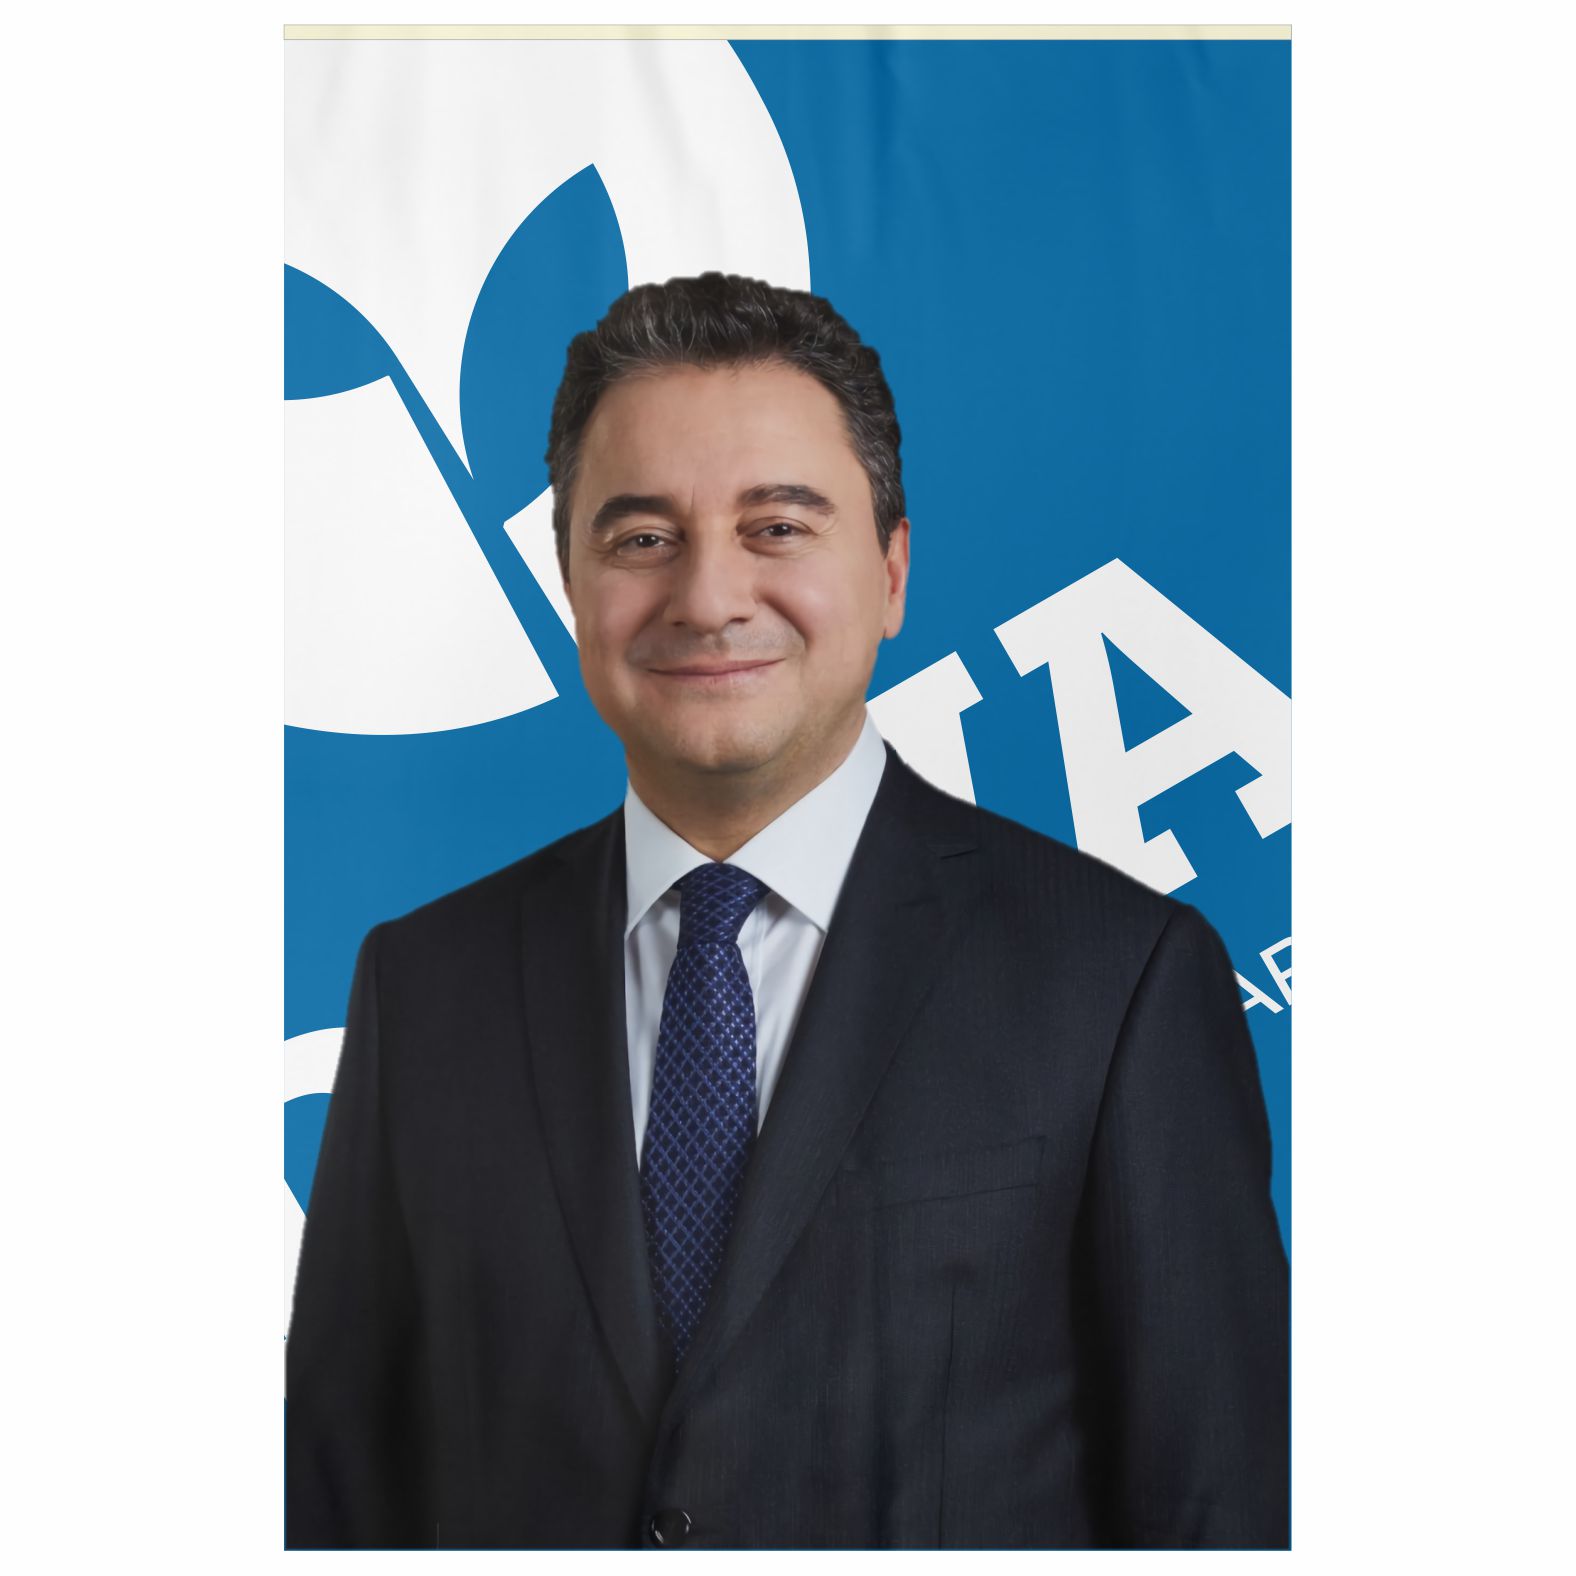 Ali Babacan Poster